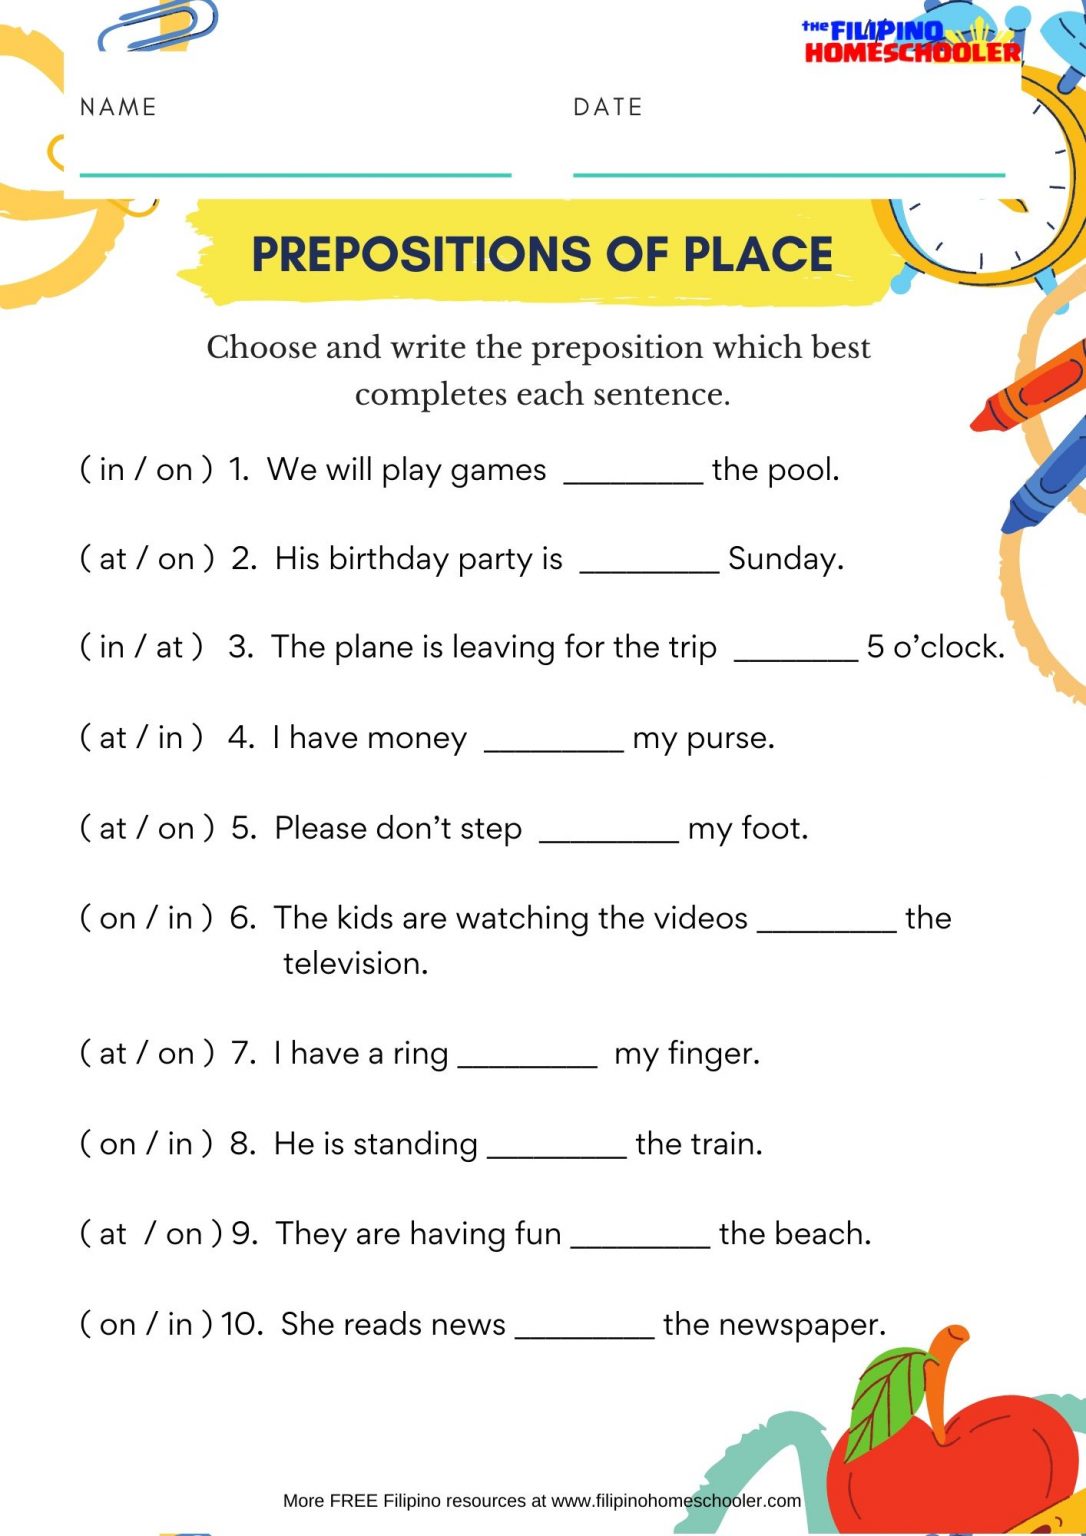 in-on-at-prepositions-of-place-worksheet-the-filipino-homeschooler